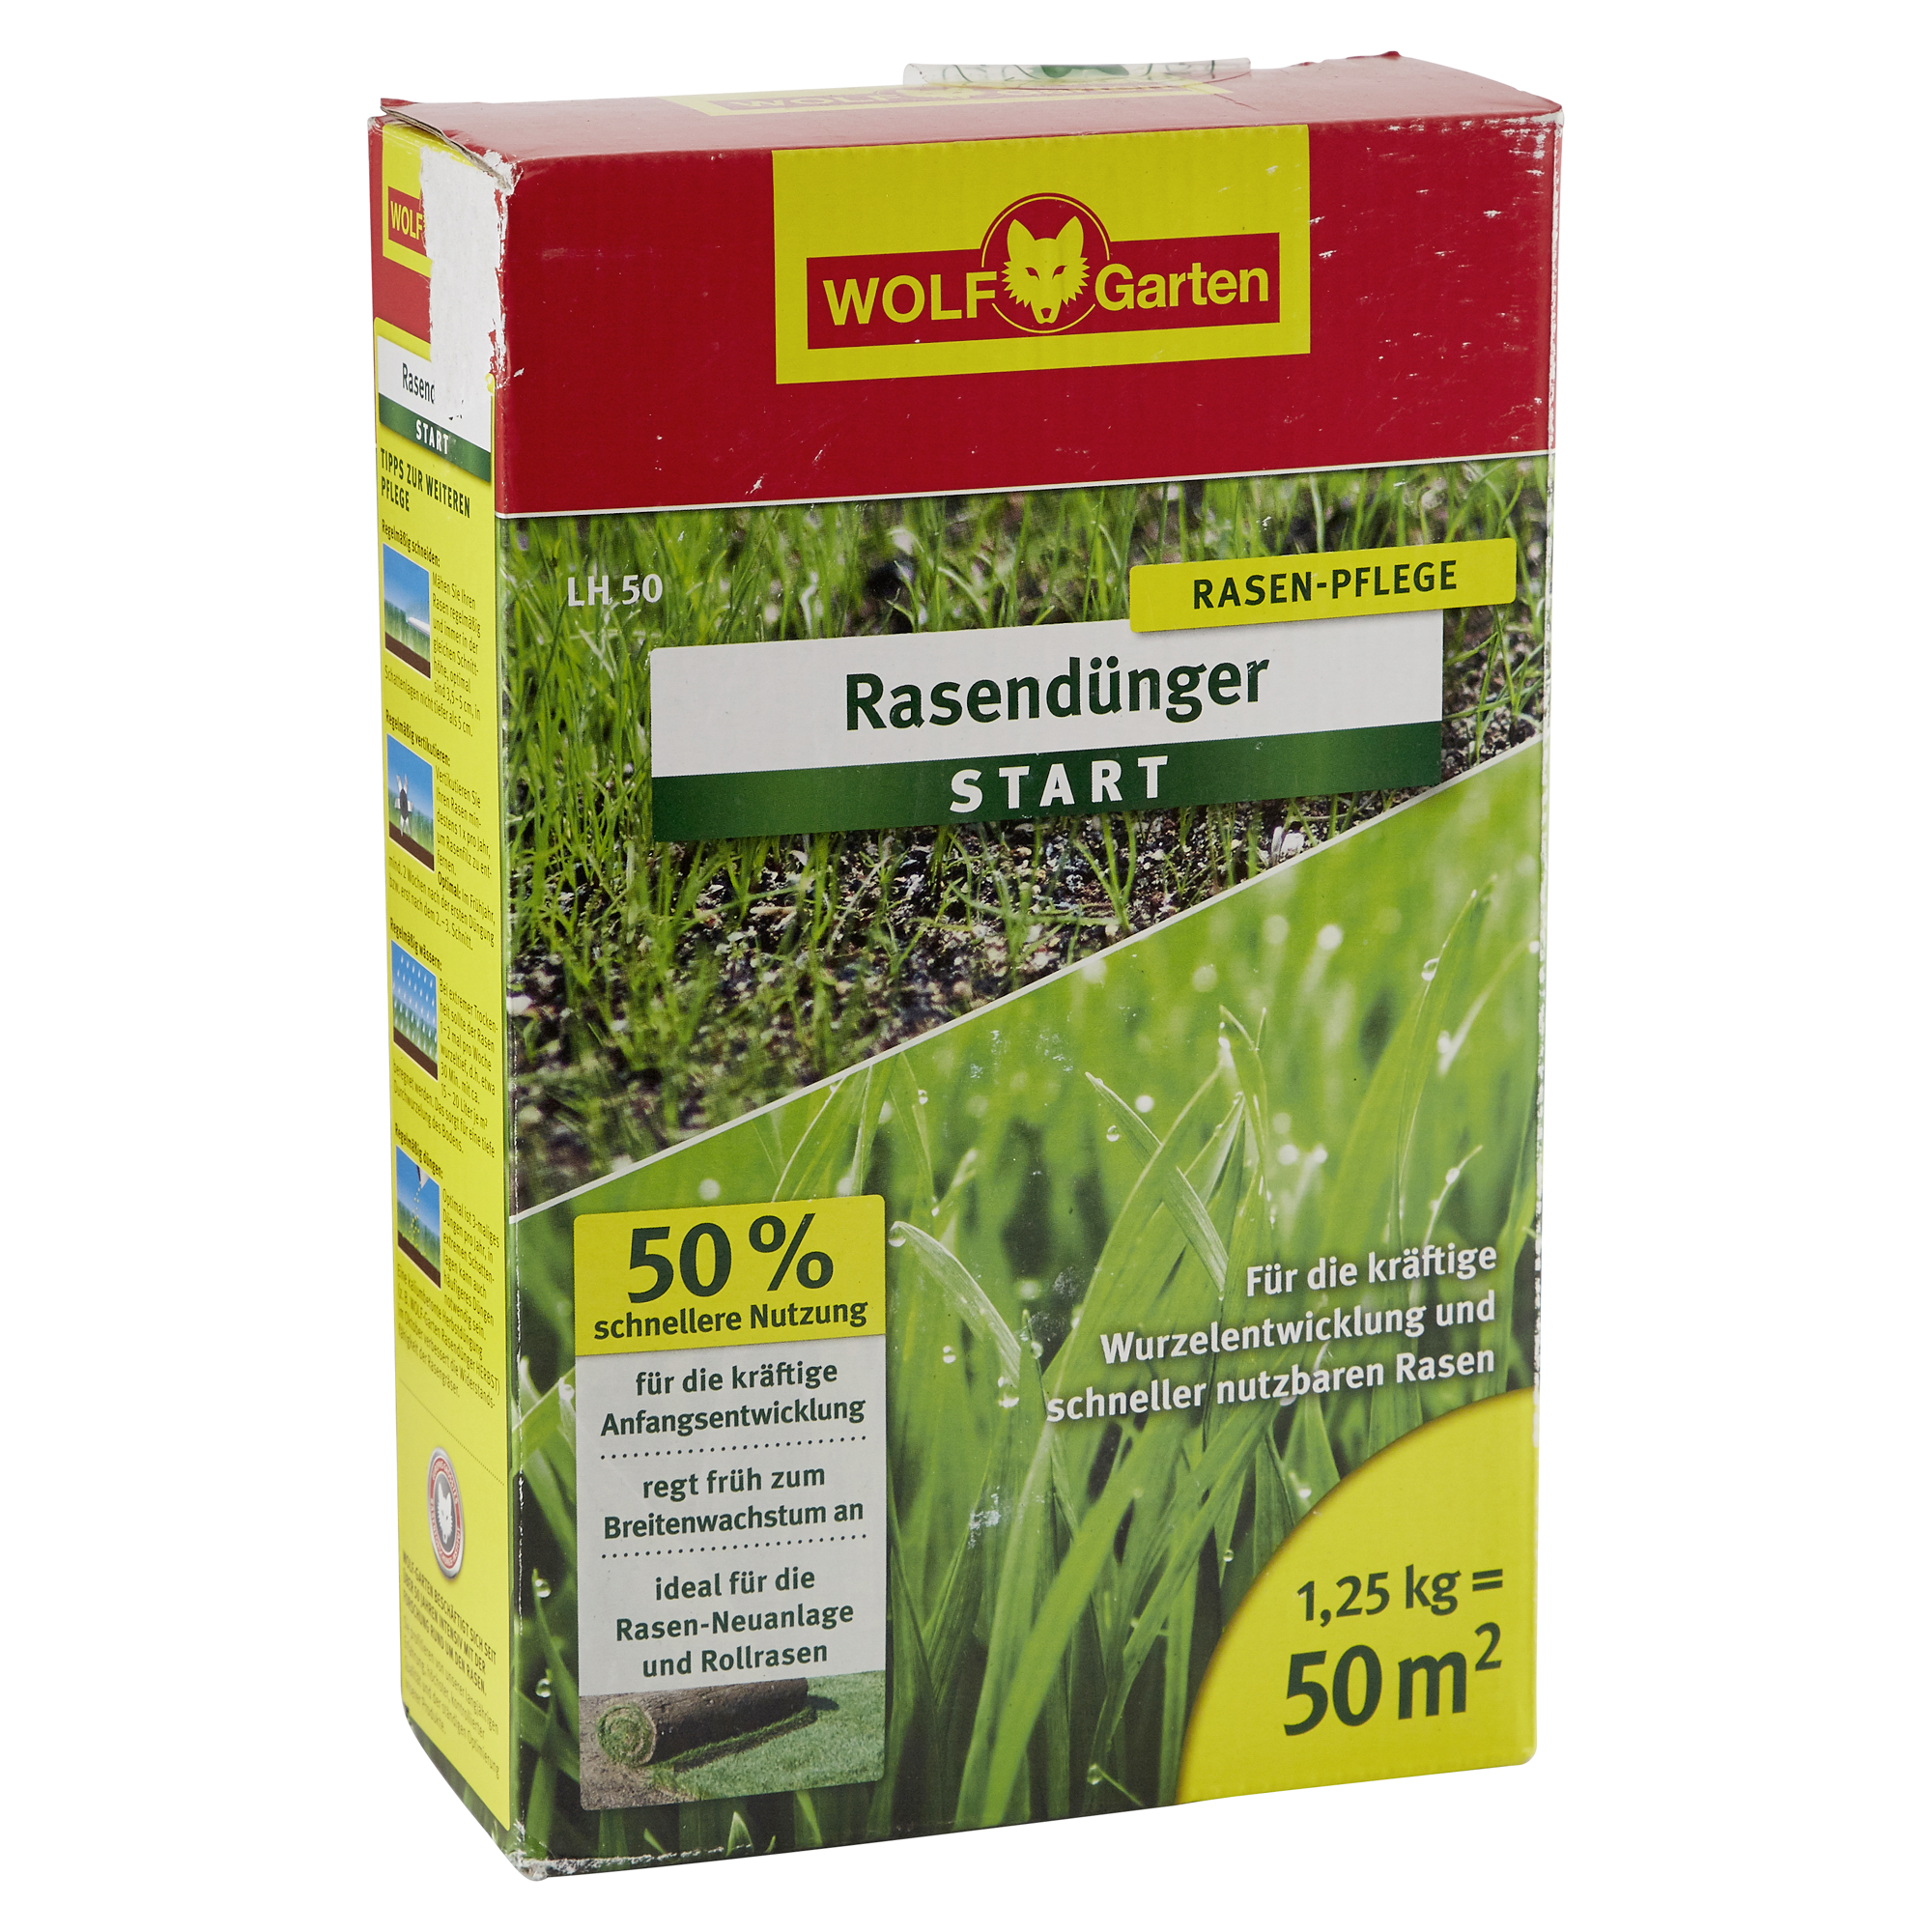 Rasendünger Start 50 m² 1,25 kg + product picture